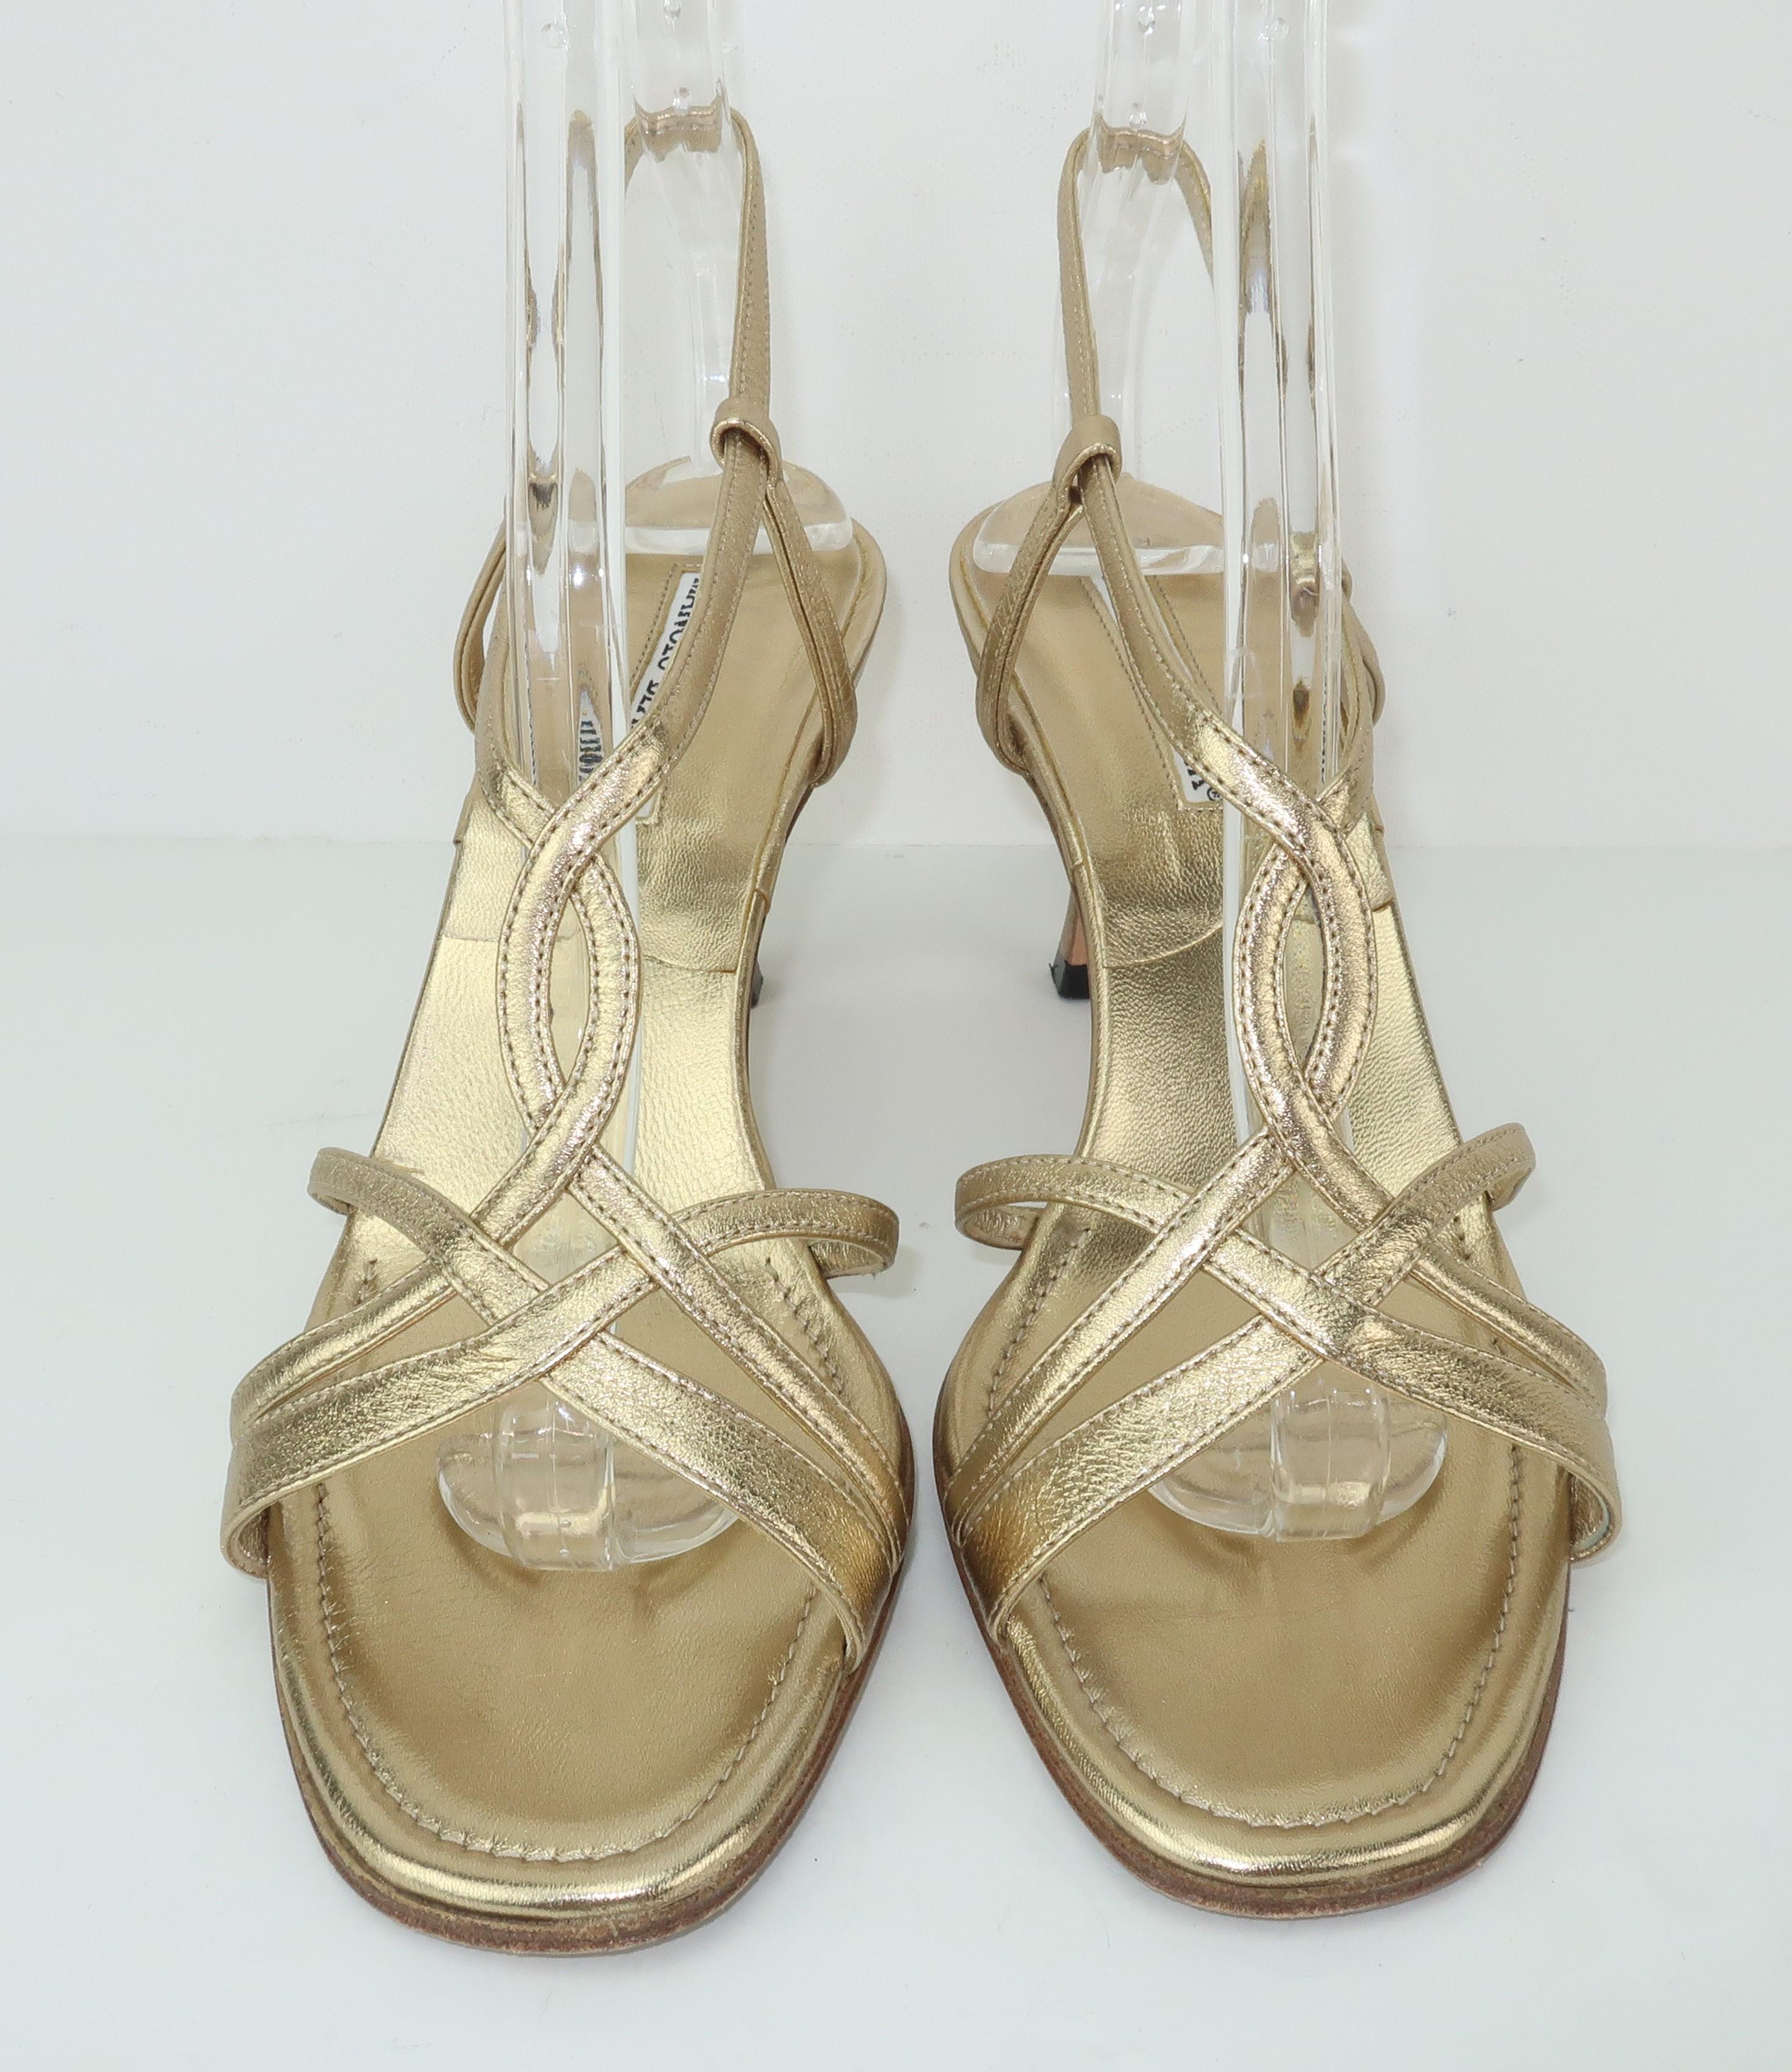 A Blahnik basic!  This strappy gold leather sandal by Manolo Blahnik combines a classic evening wear look with a stylishly simple design that will prove to be a 'go to' shoe for many occasions.  The comfortable 3